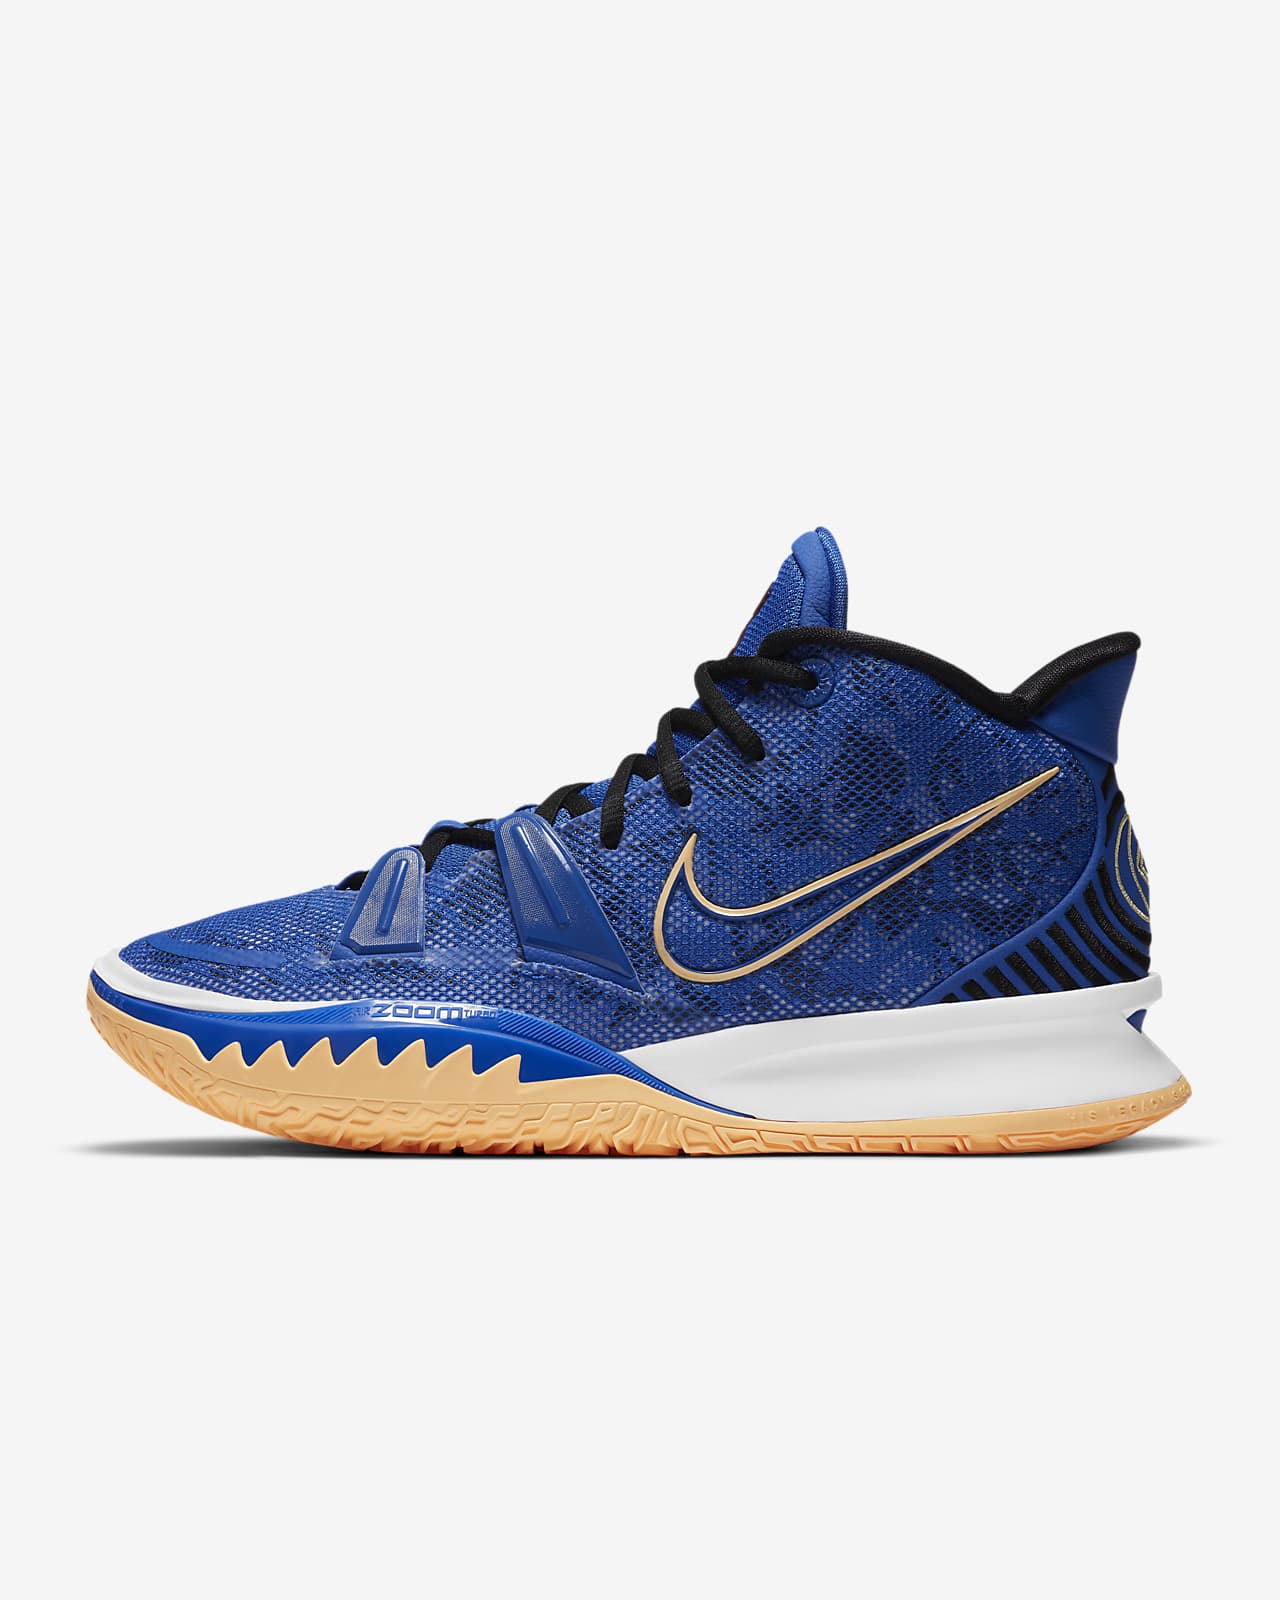 nike kyrie irving shoes